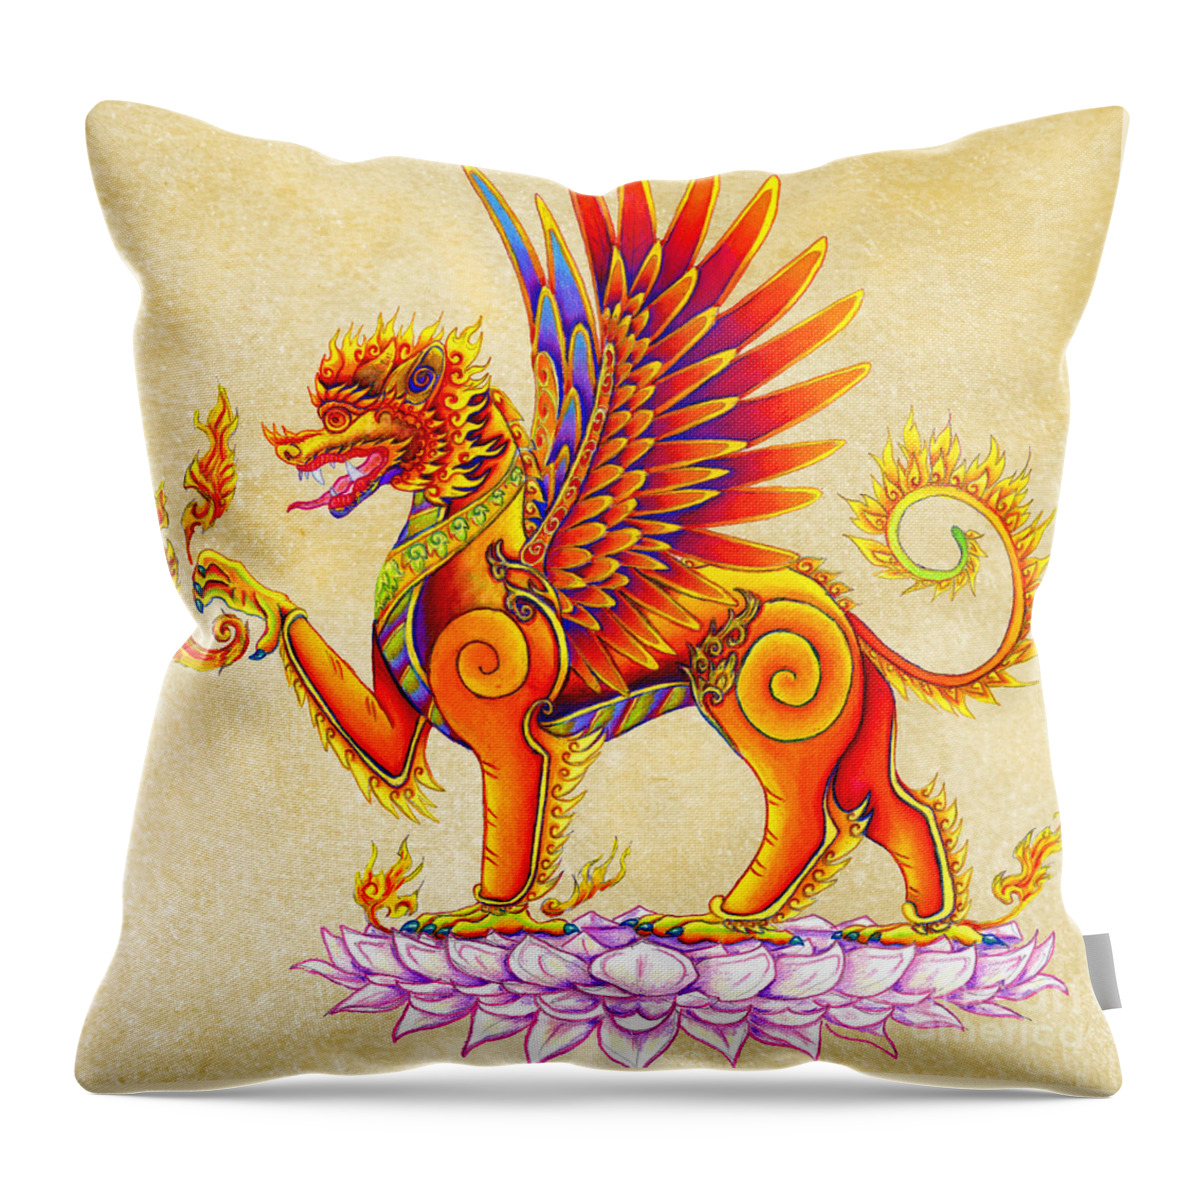 Singha Throw Pillow featuring the drawing Singha Balinese Winged Lion by Rebecca Wang